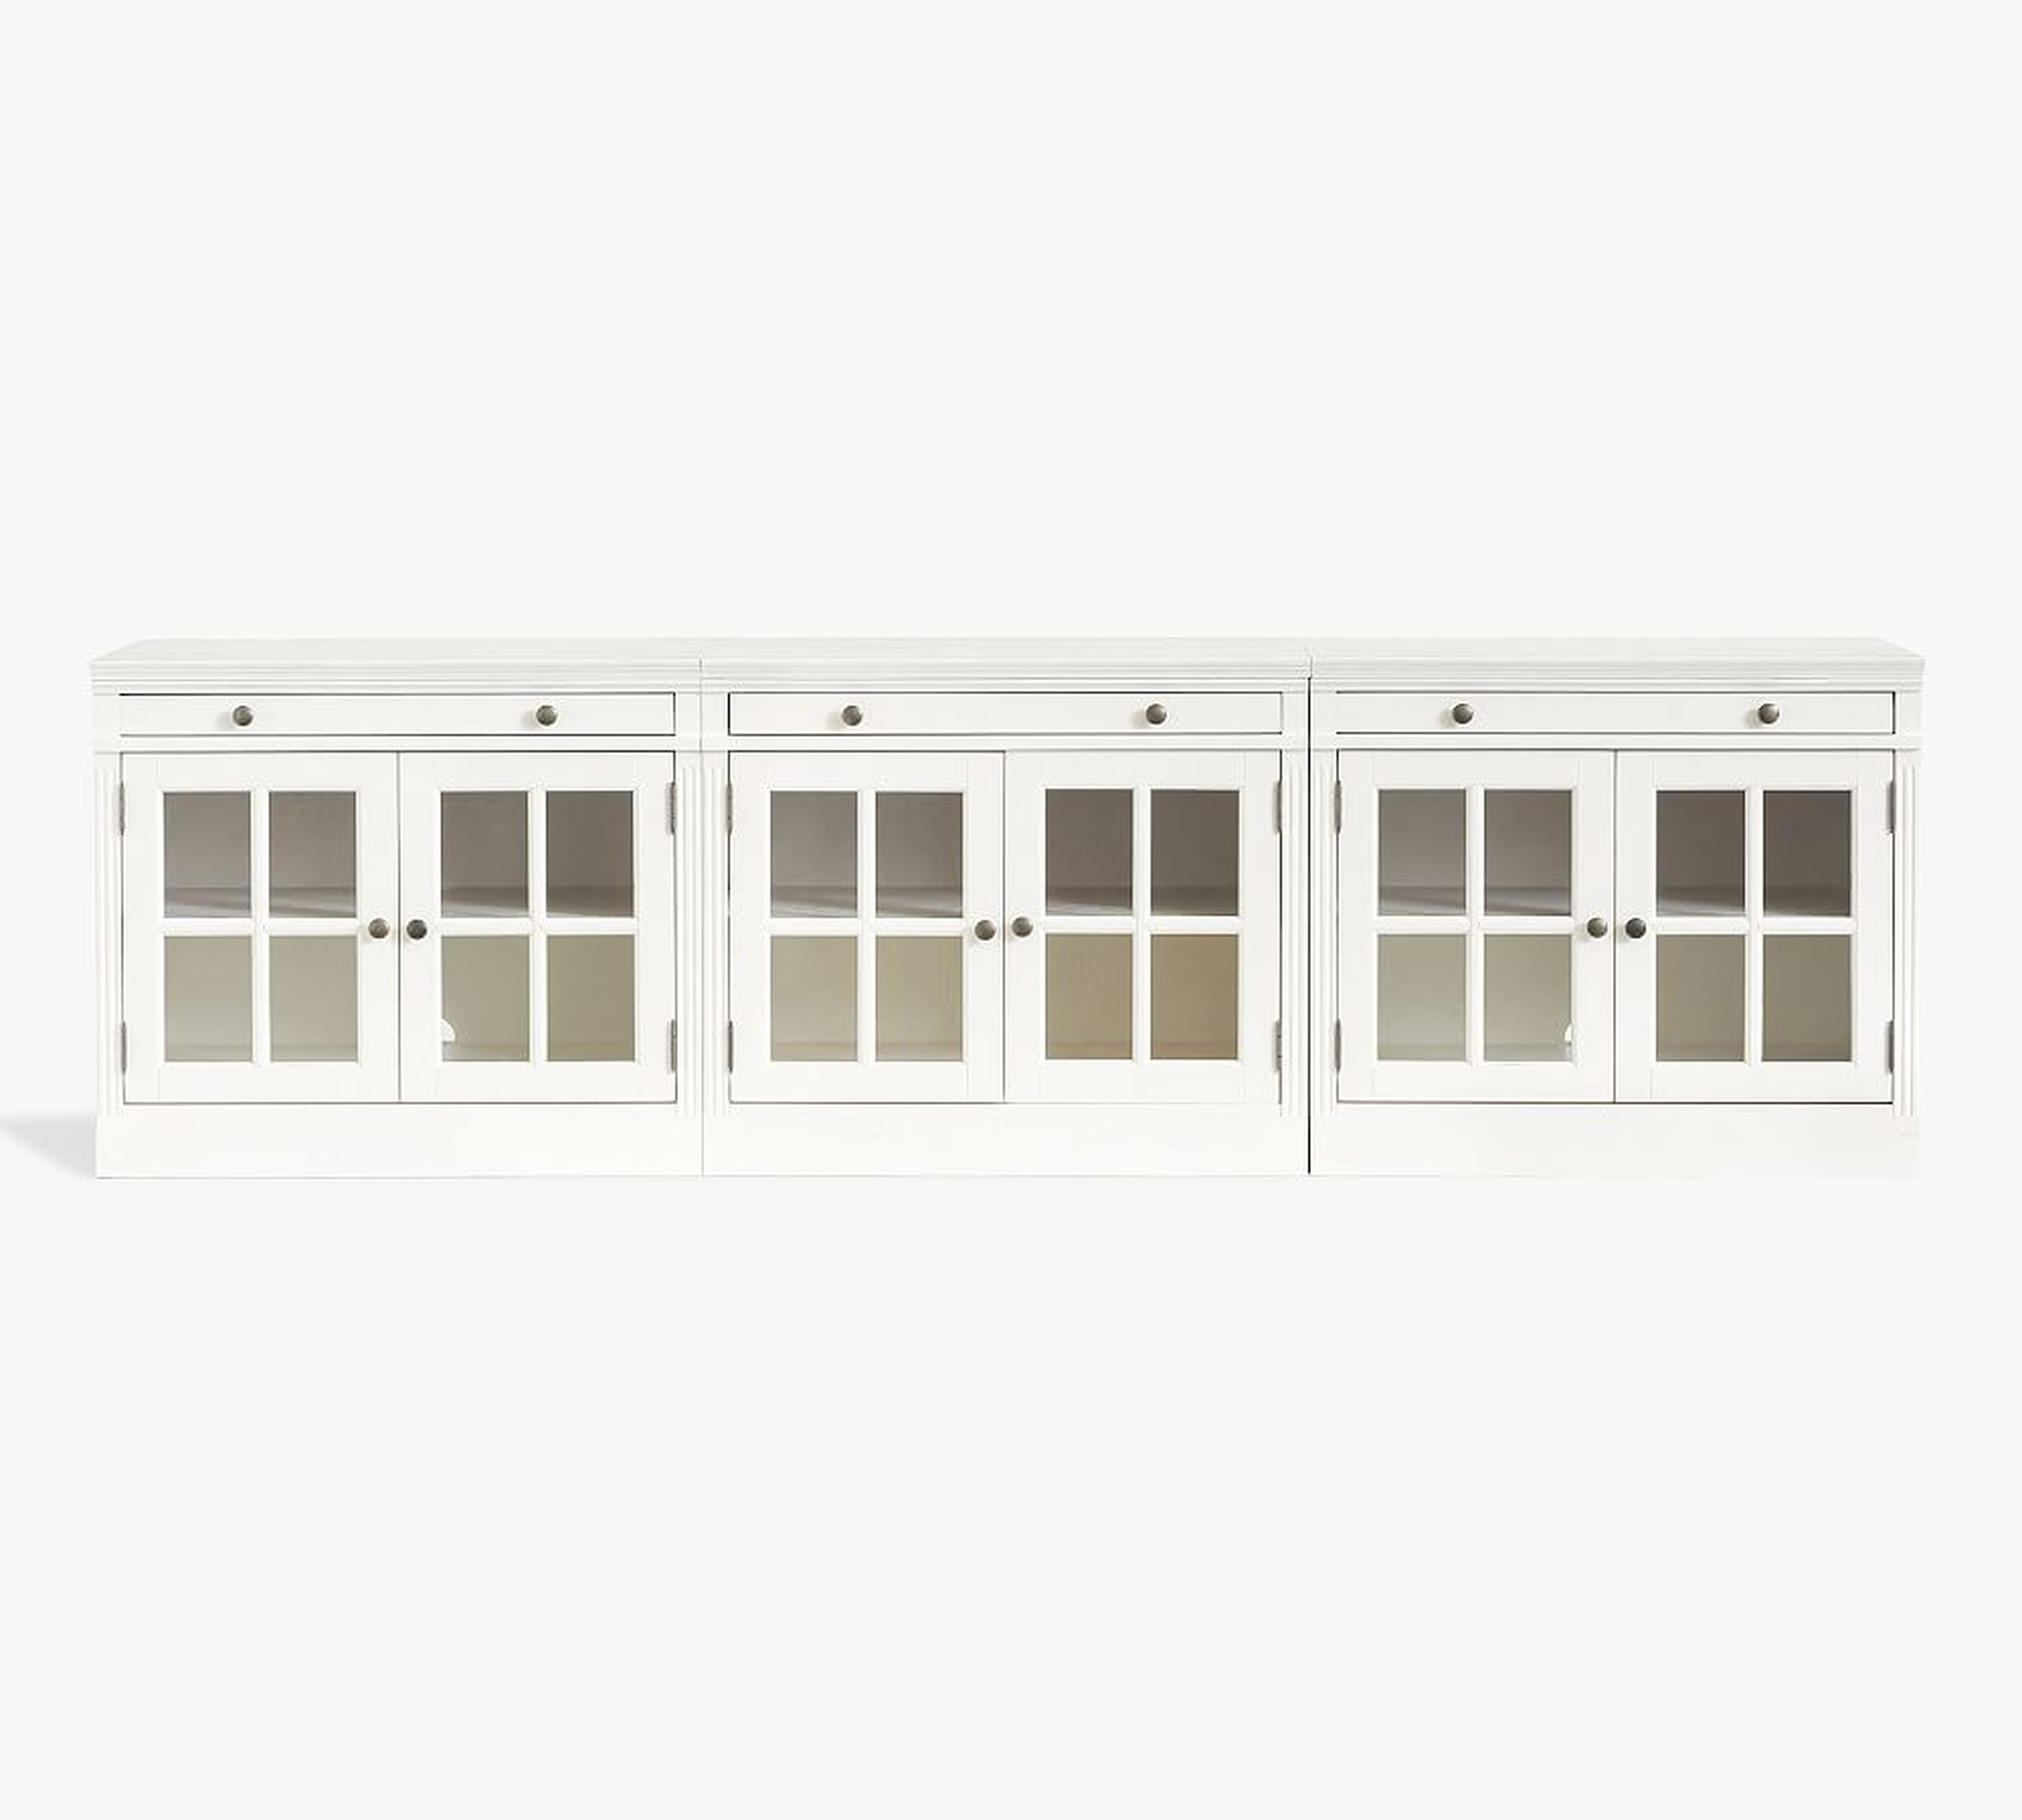 Livingston 105" Media Console with Glass Door Cabinets, Montauk White - Pottery Barn